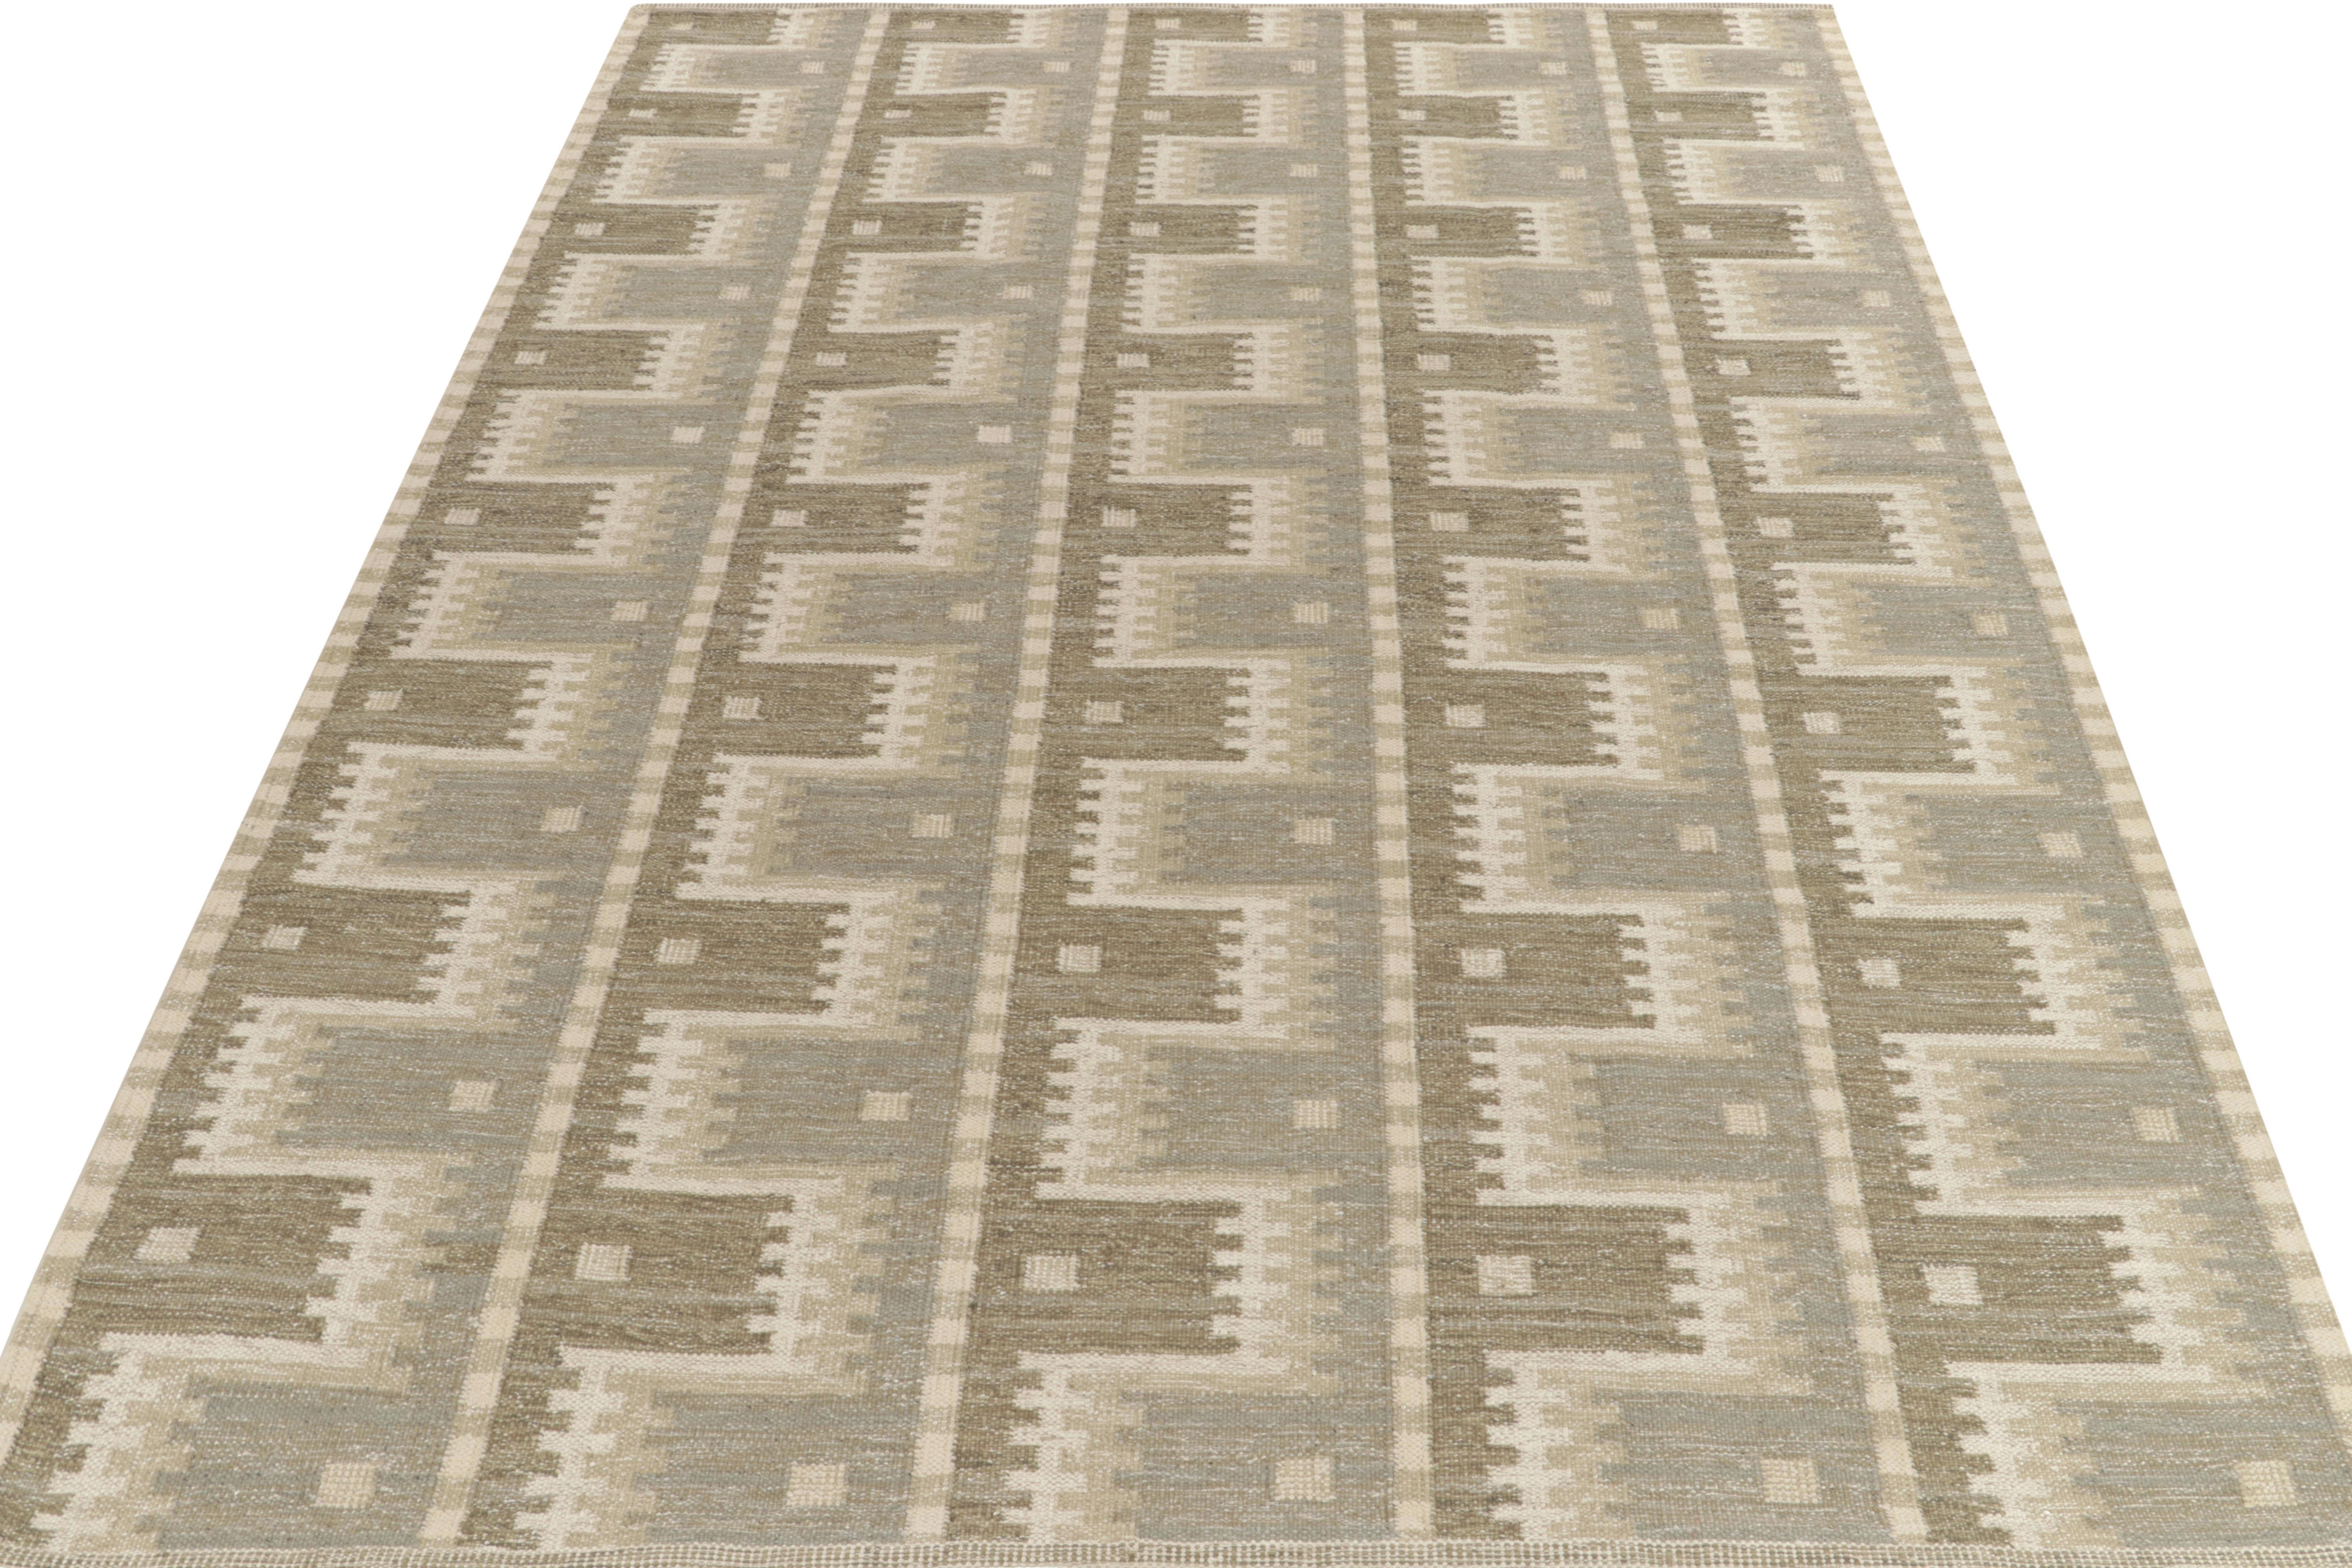 Handwoven in fine quality wool, a custom design from our award-winning Scandinavian flat weave texture. Exemplified in this 9x12 scale, this kilim rug features a sharp geometric pattern in gray, beige-brown, white & a hint of stone blue for an